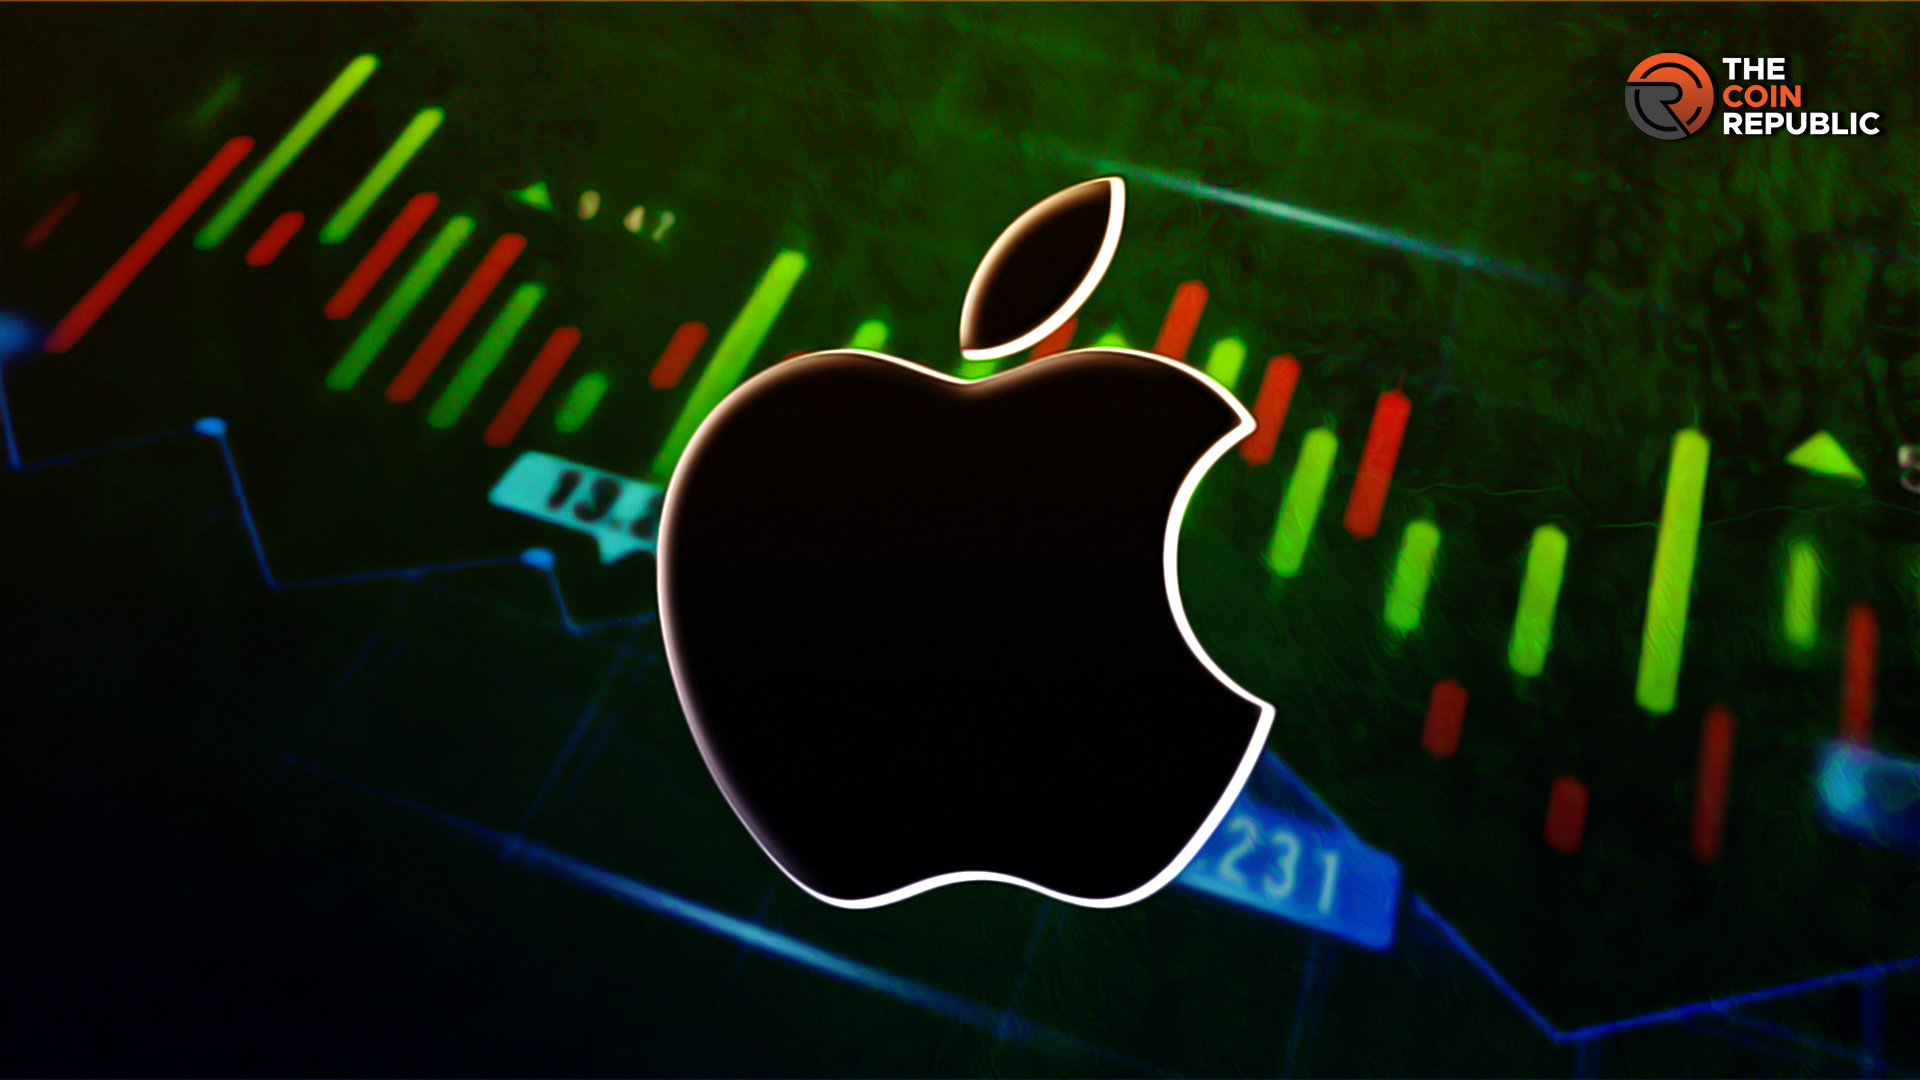 AAPL Stock Forecast: Is Fall Limited, Will (NASDAQ: AAPL) Rise? 